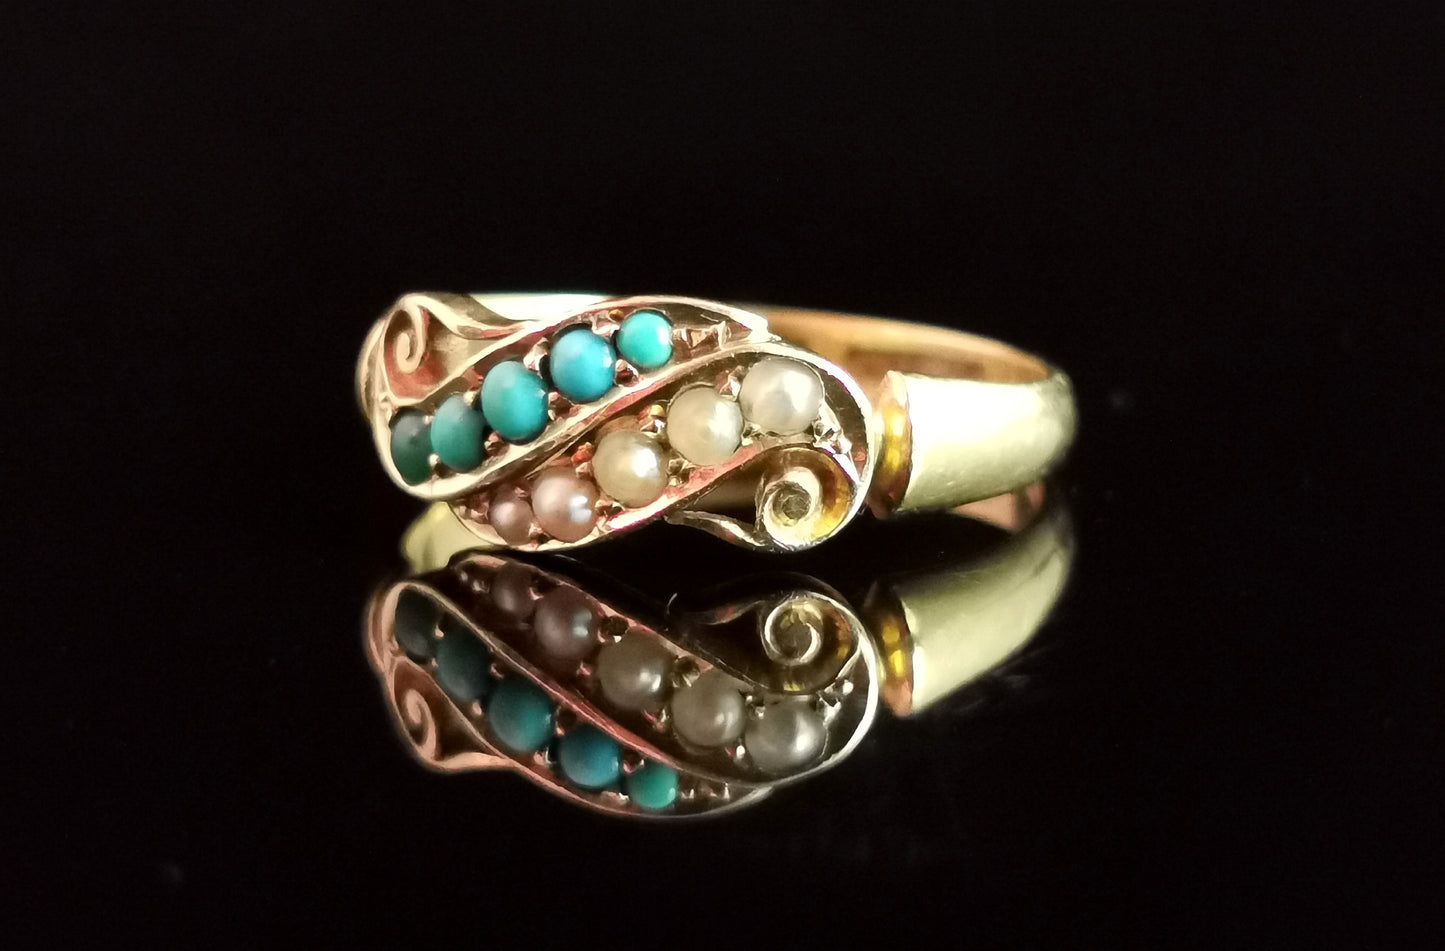 Antique Turquoise and pearl ring, 18ct gold, Victorian